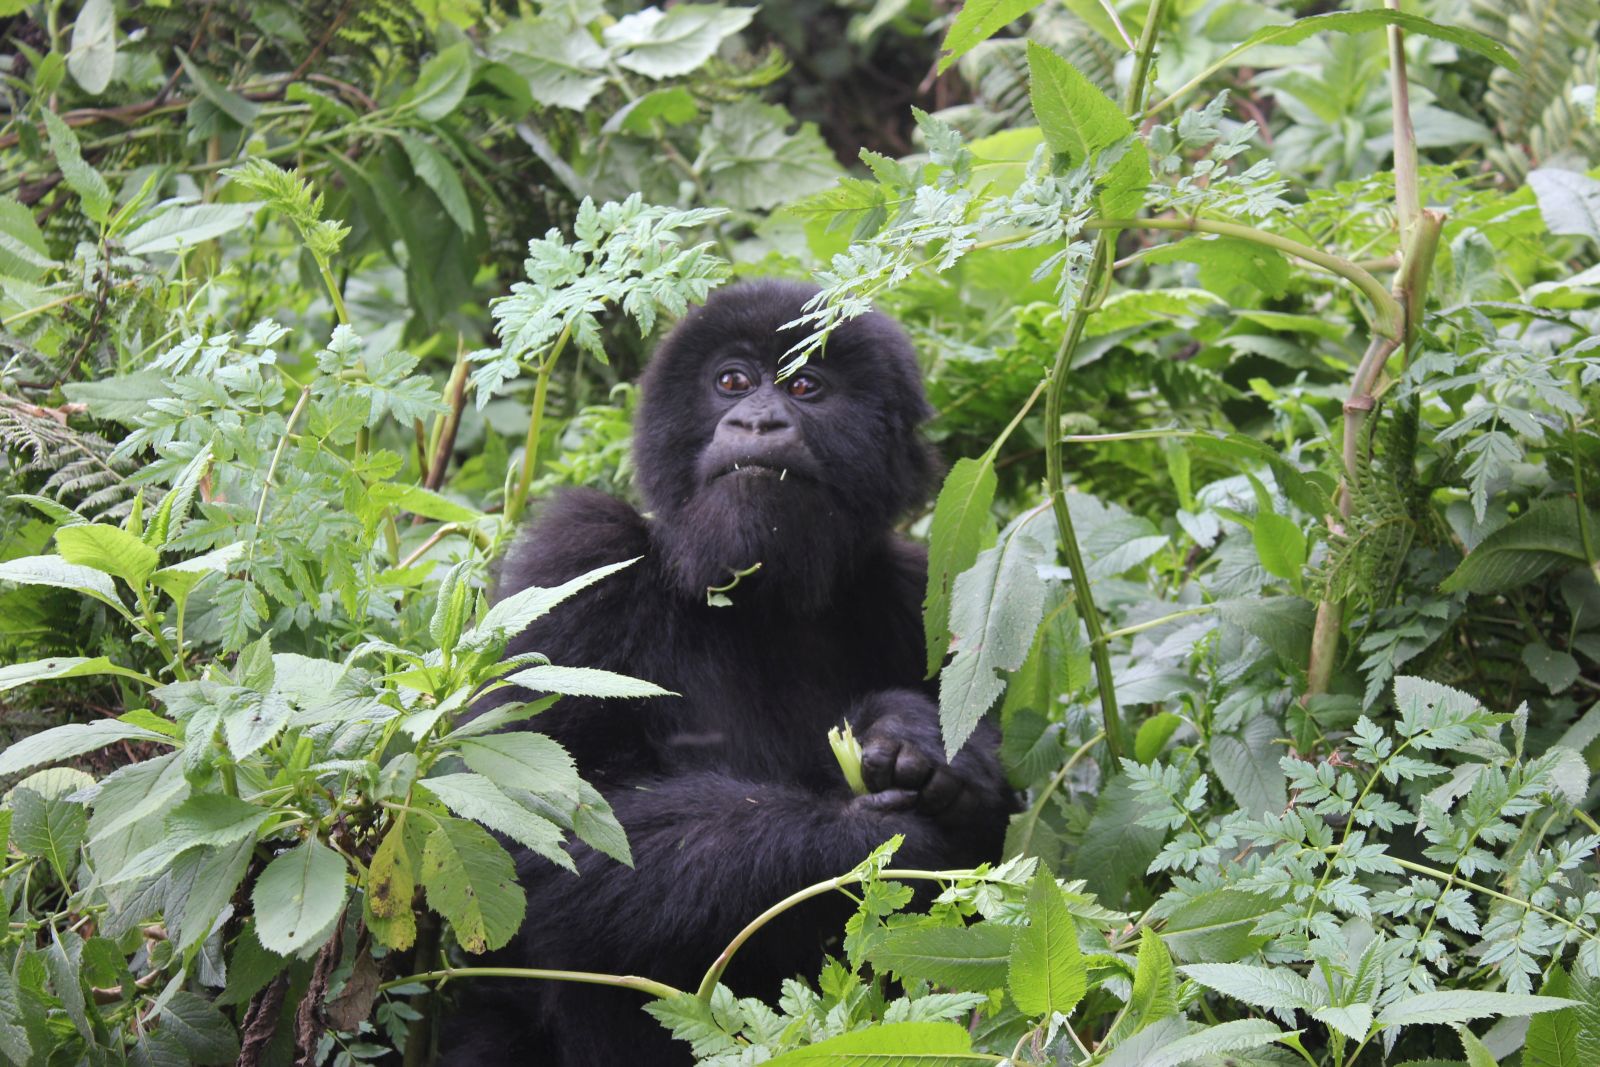 An African mountain gorilla sitting amongst green foliage looking straight at the camera in Rwanda